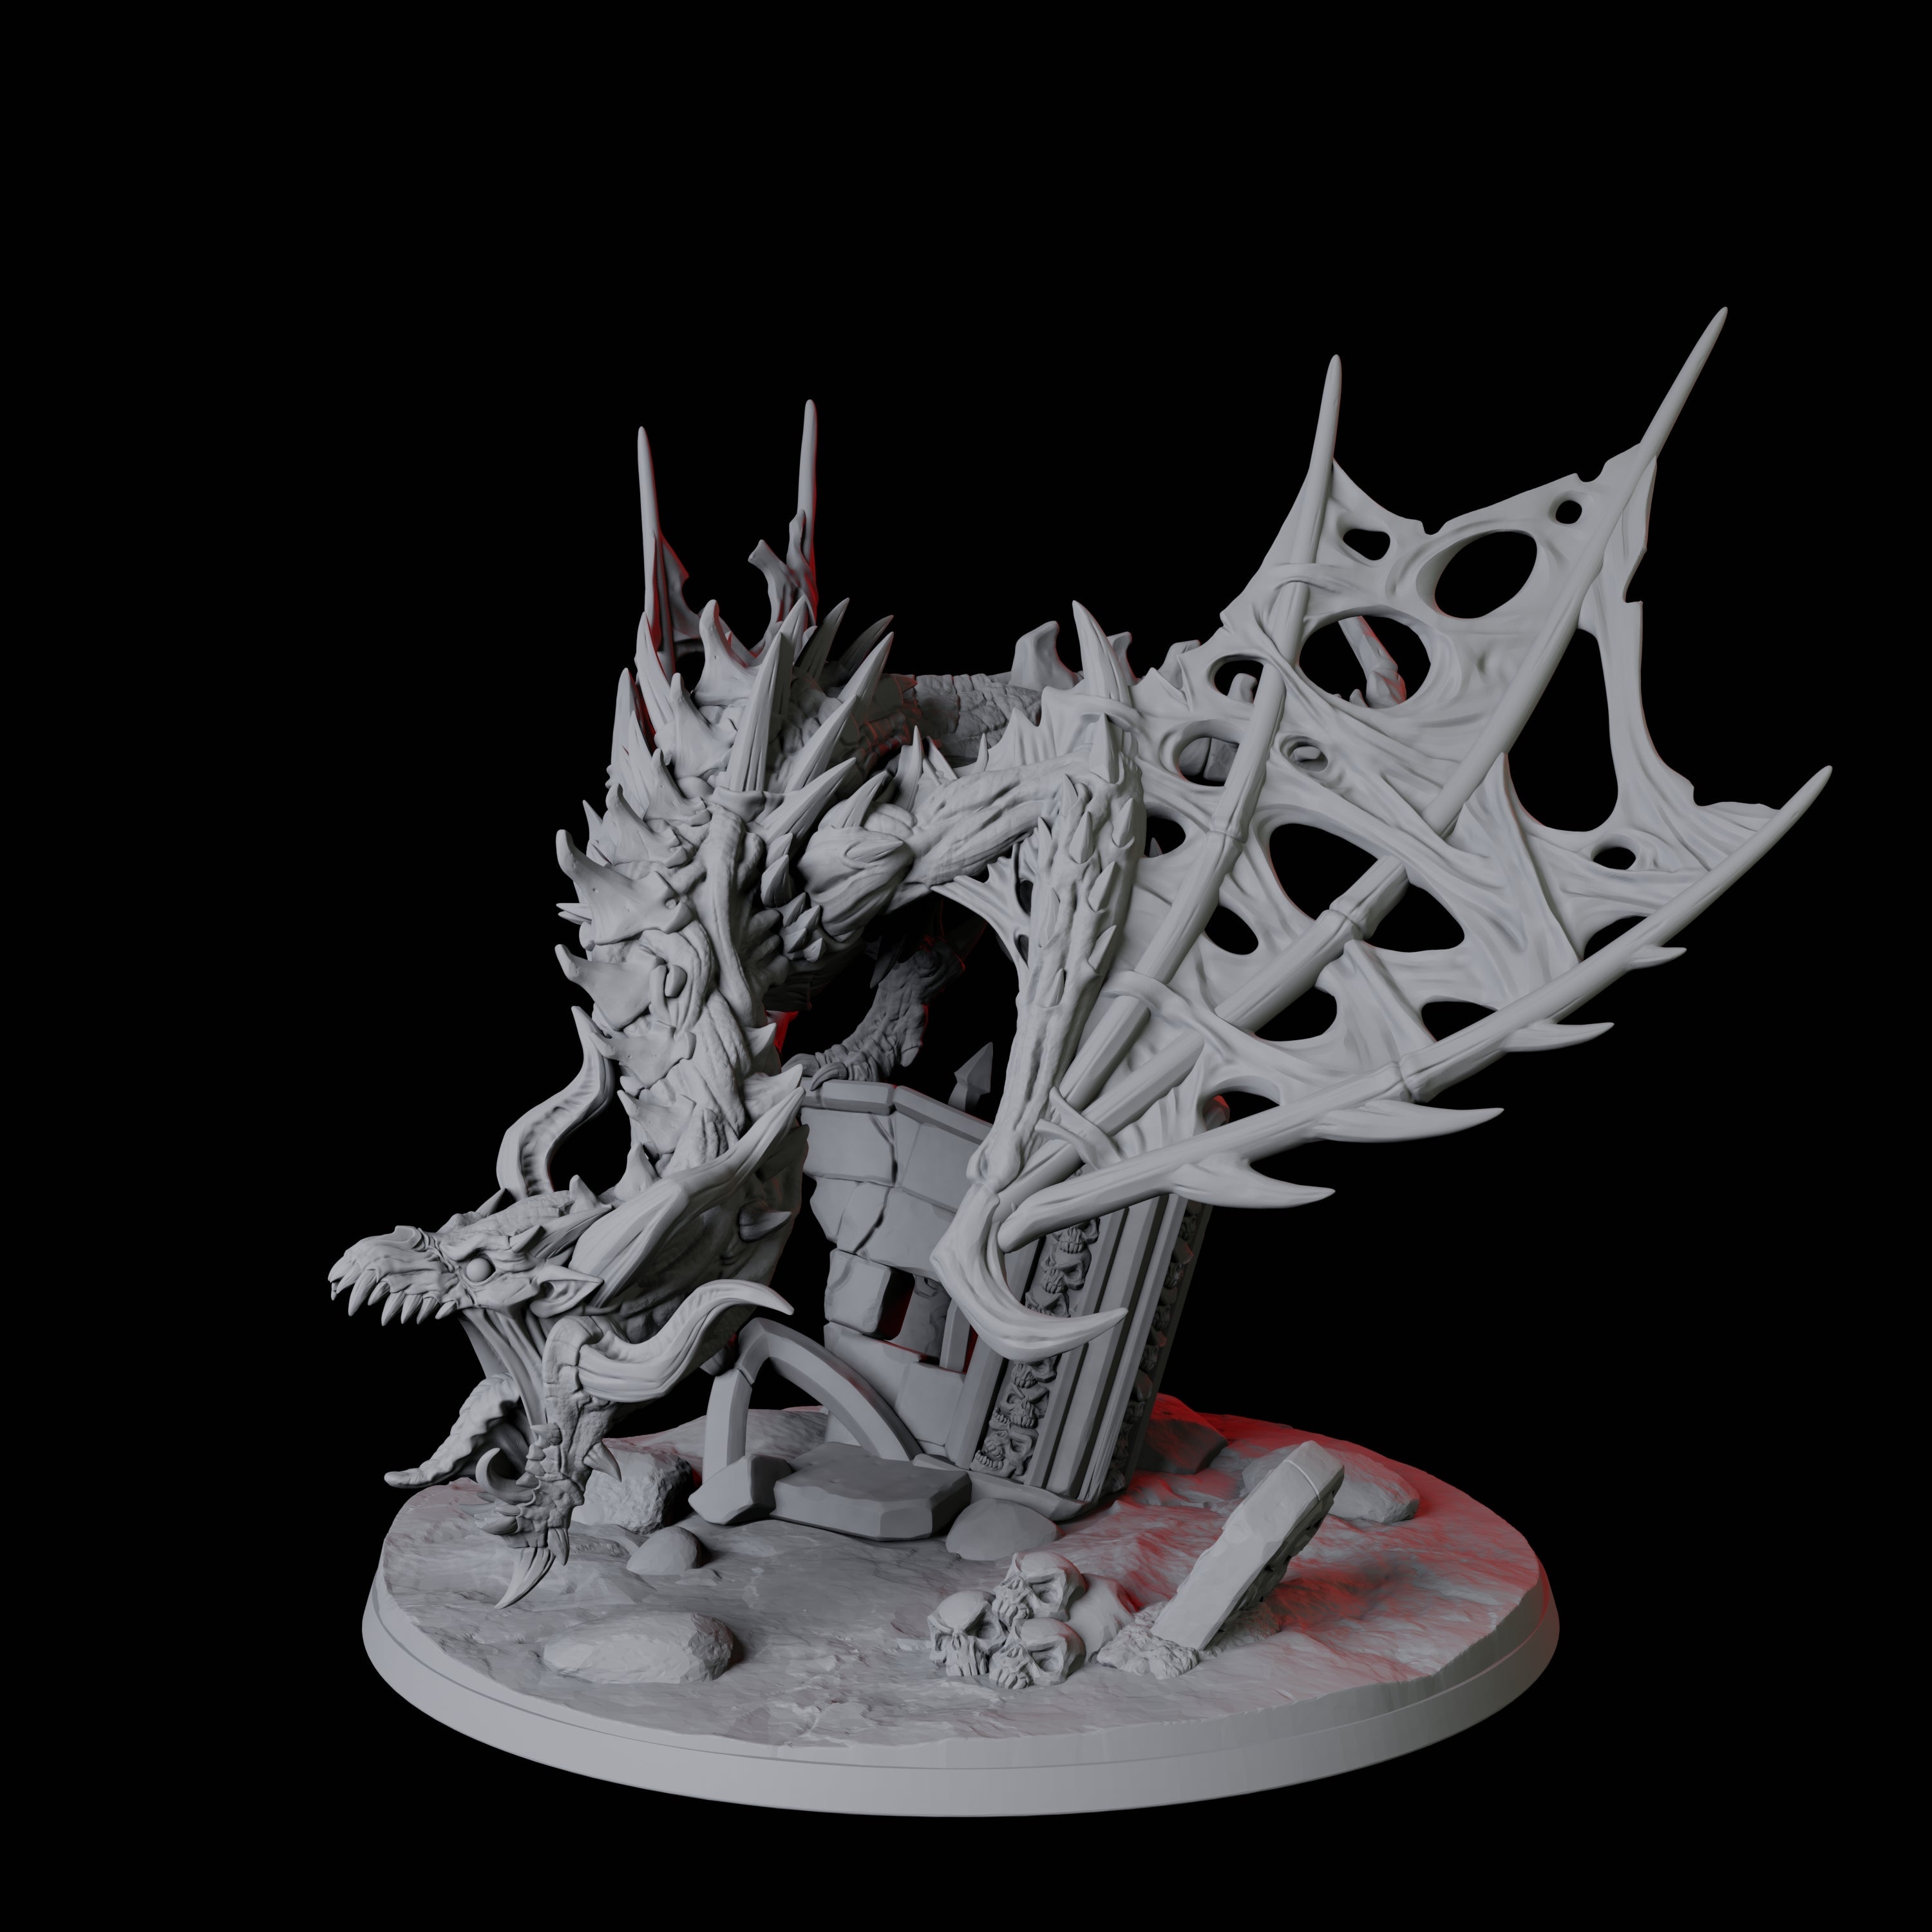 Undead Bone Dragon Miniature for Dungeons and Dragons, Pathfinder or other TTRPGs